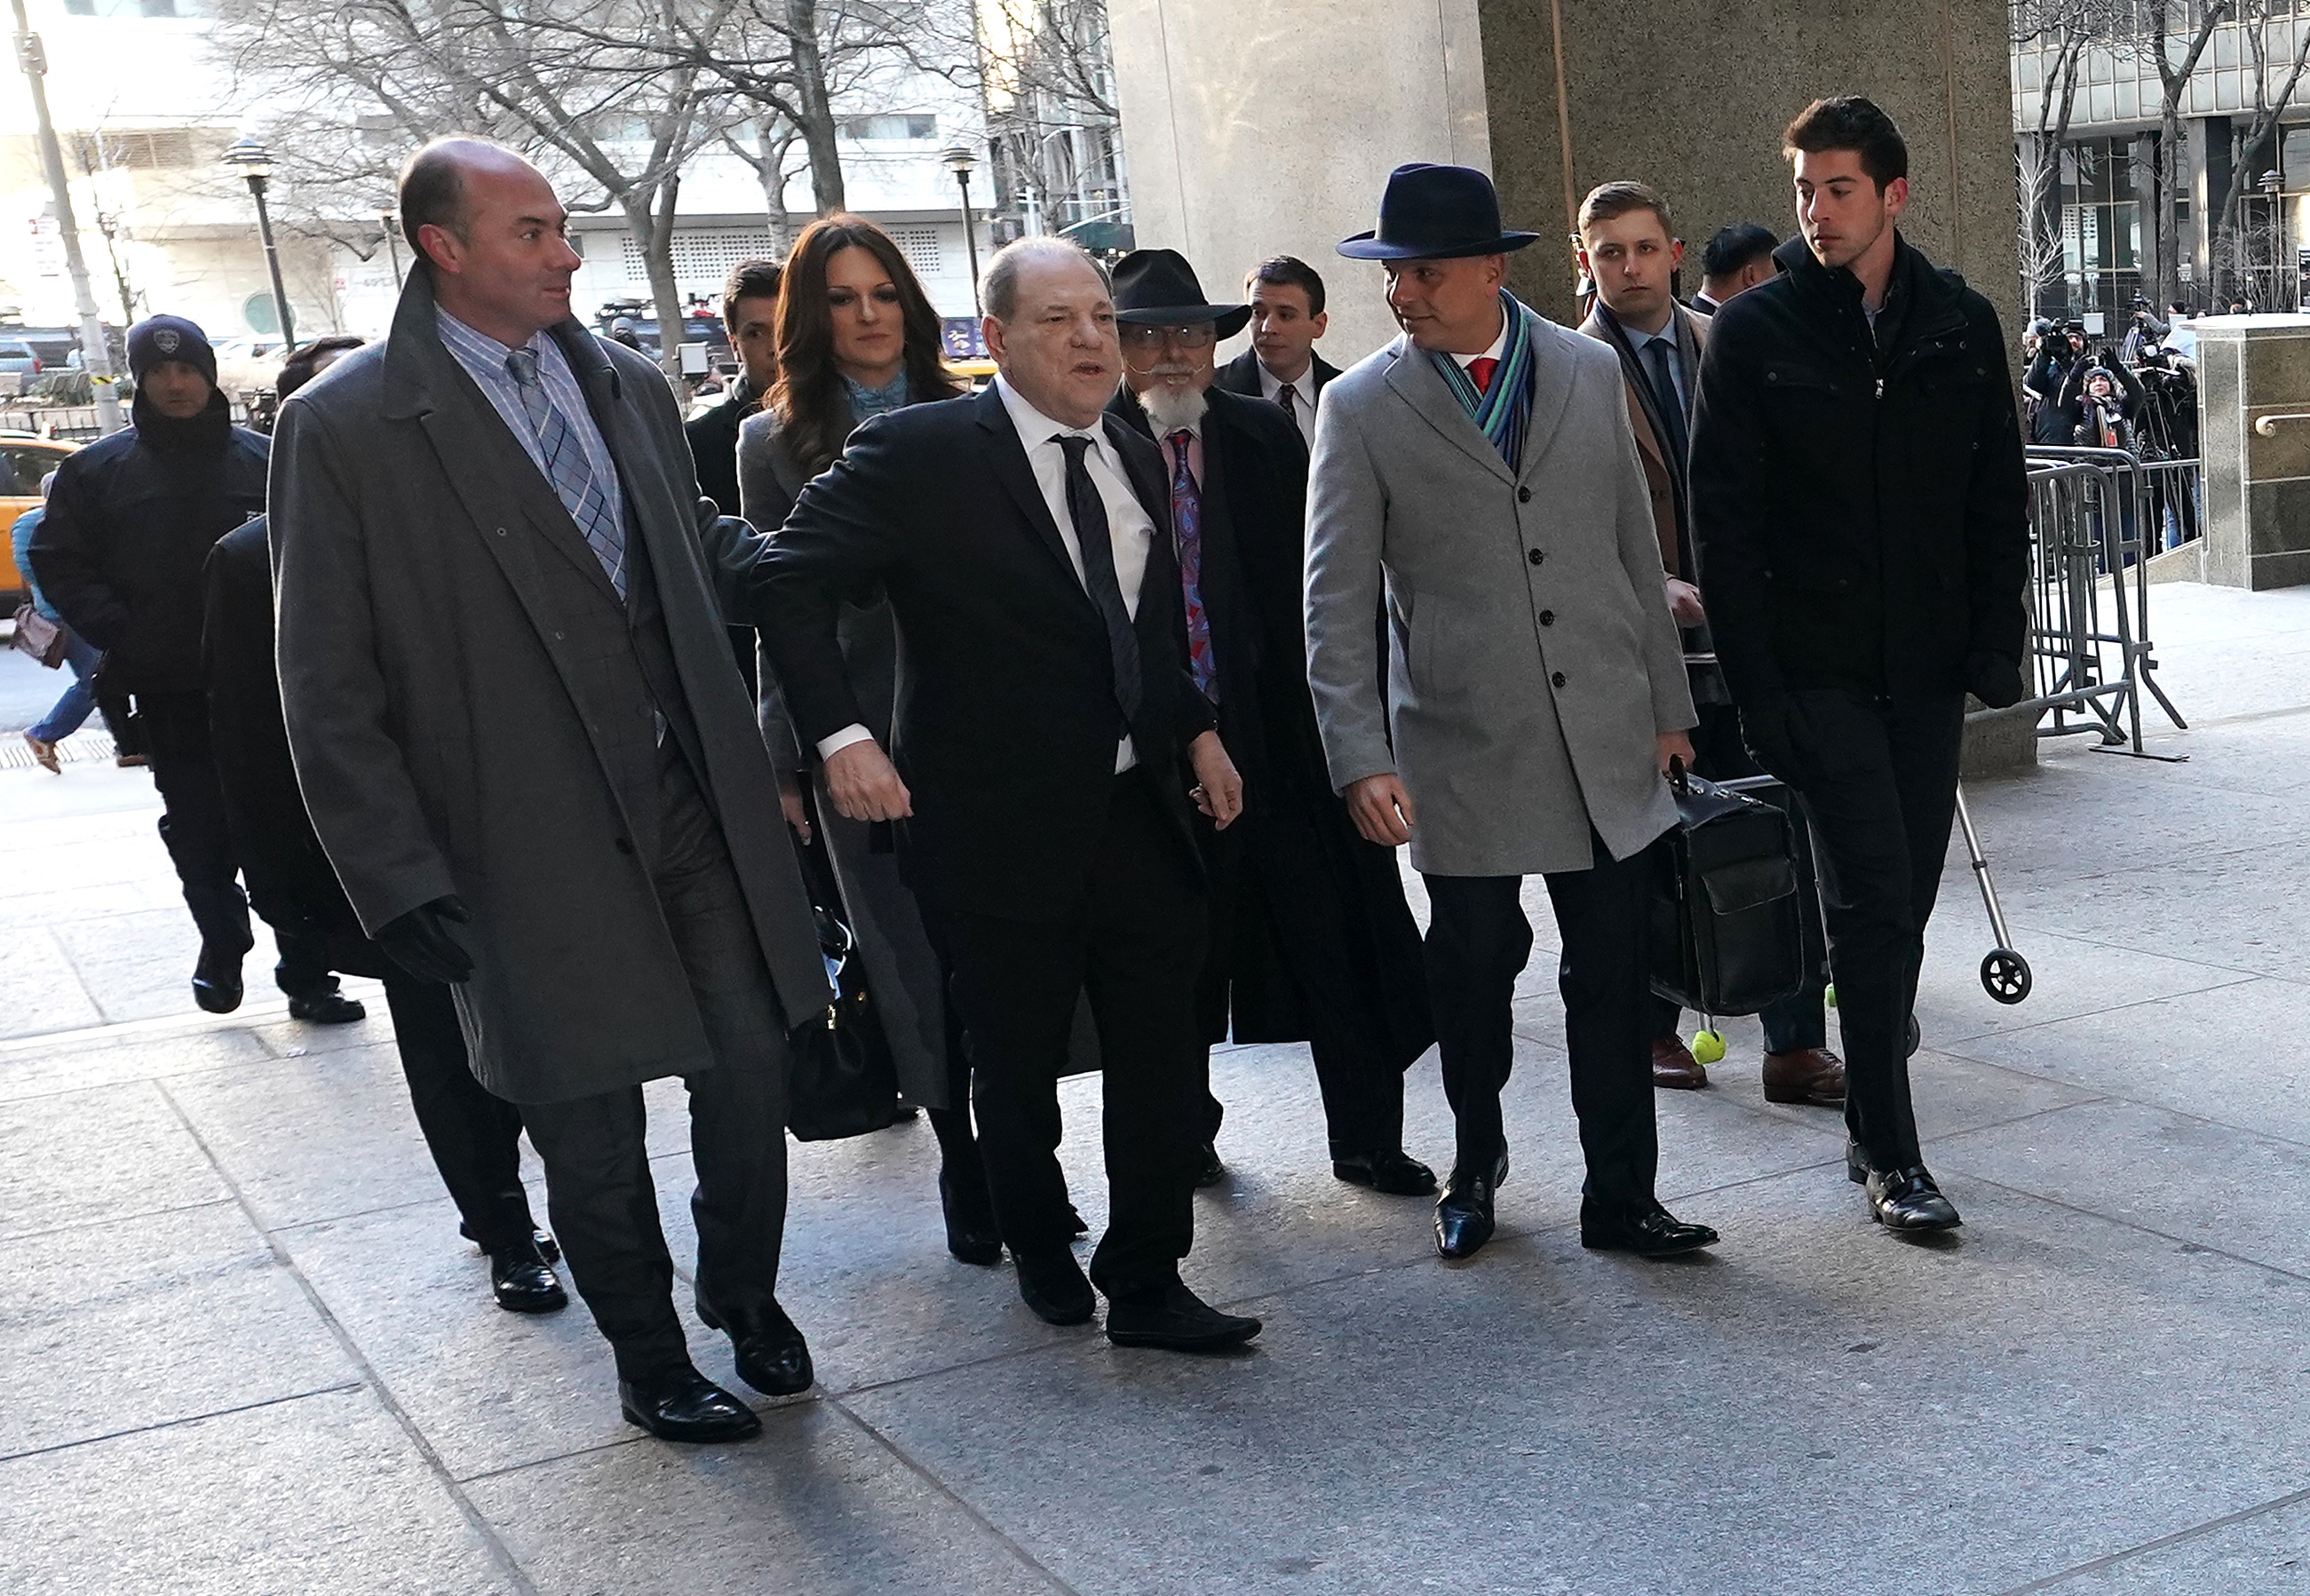 Harvey Weinstein (C) arrives at the Manhattan Criminal Court, on Jan. 22, 2020 for opening arguments in his rape trial in New York City. (AFP via Getty Images)